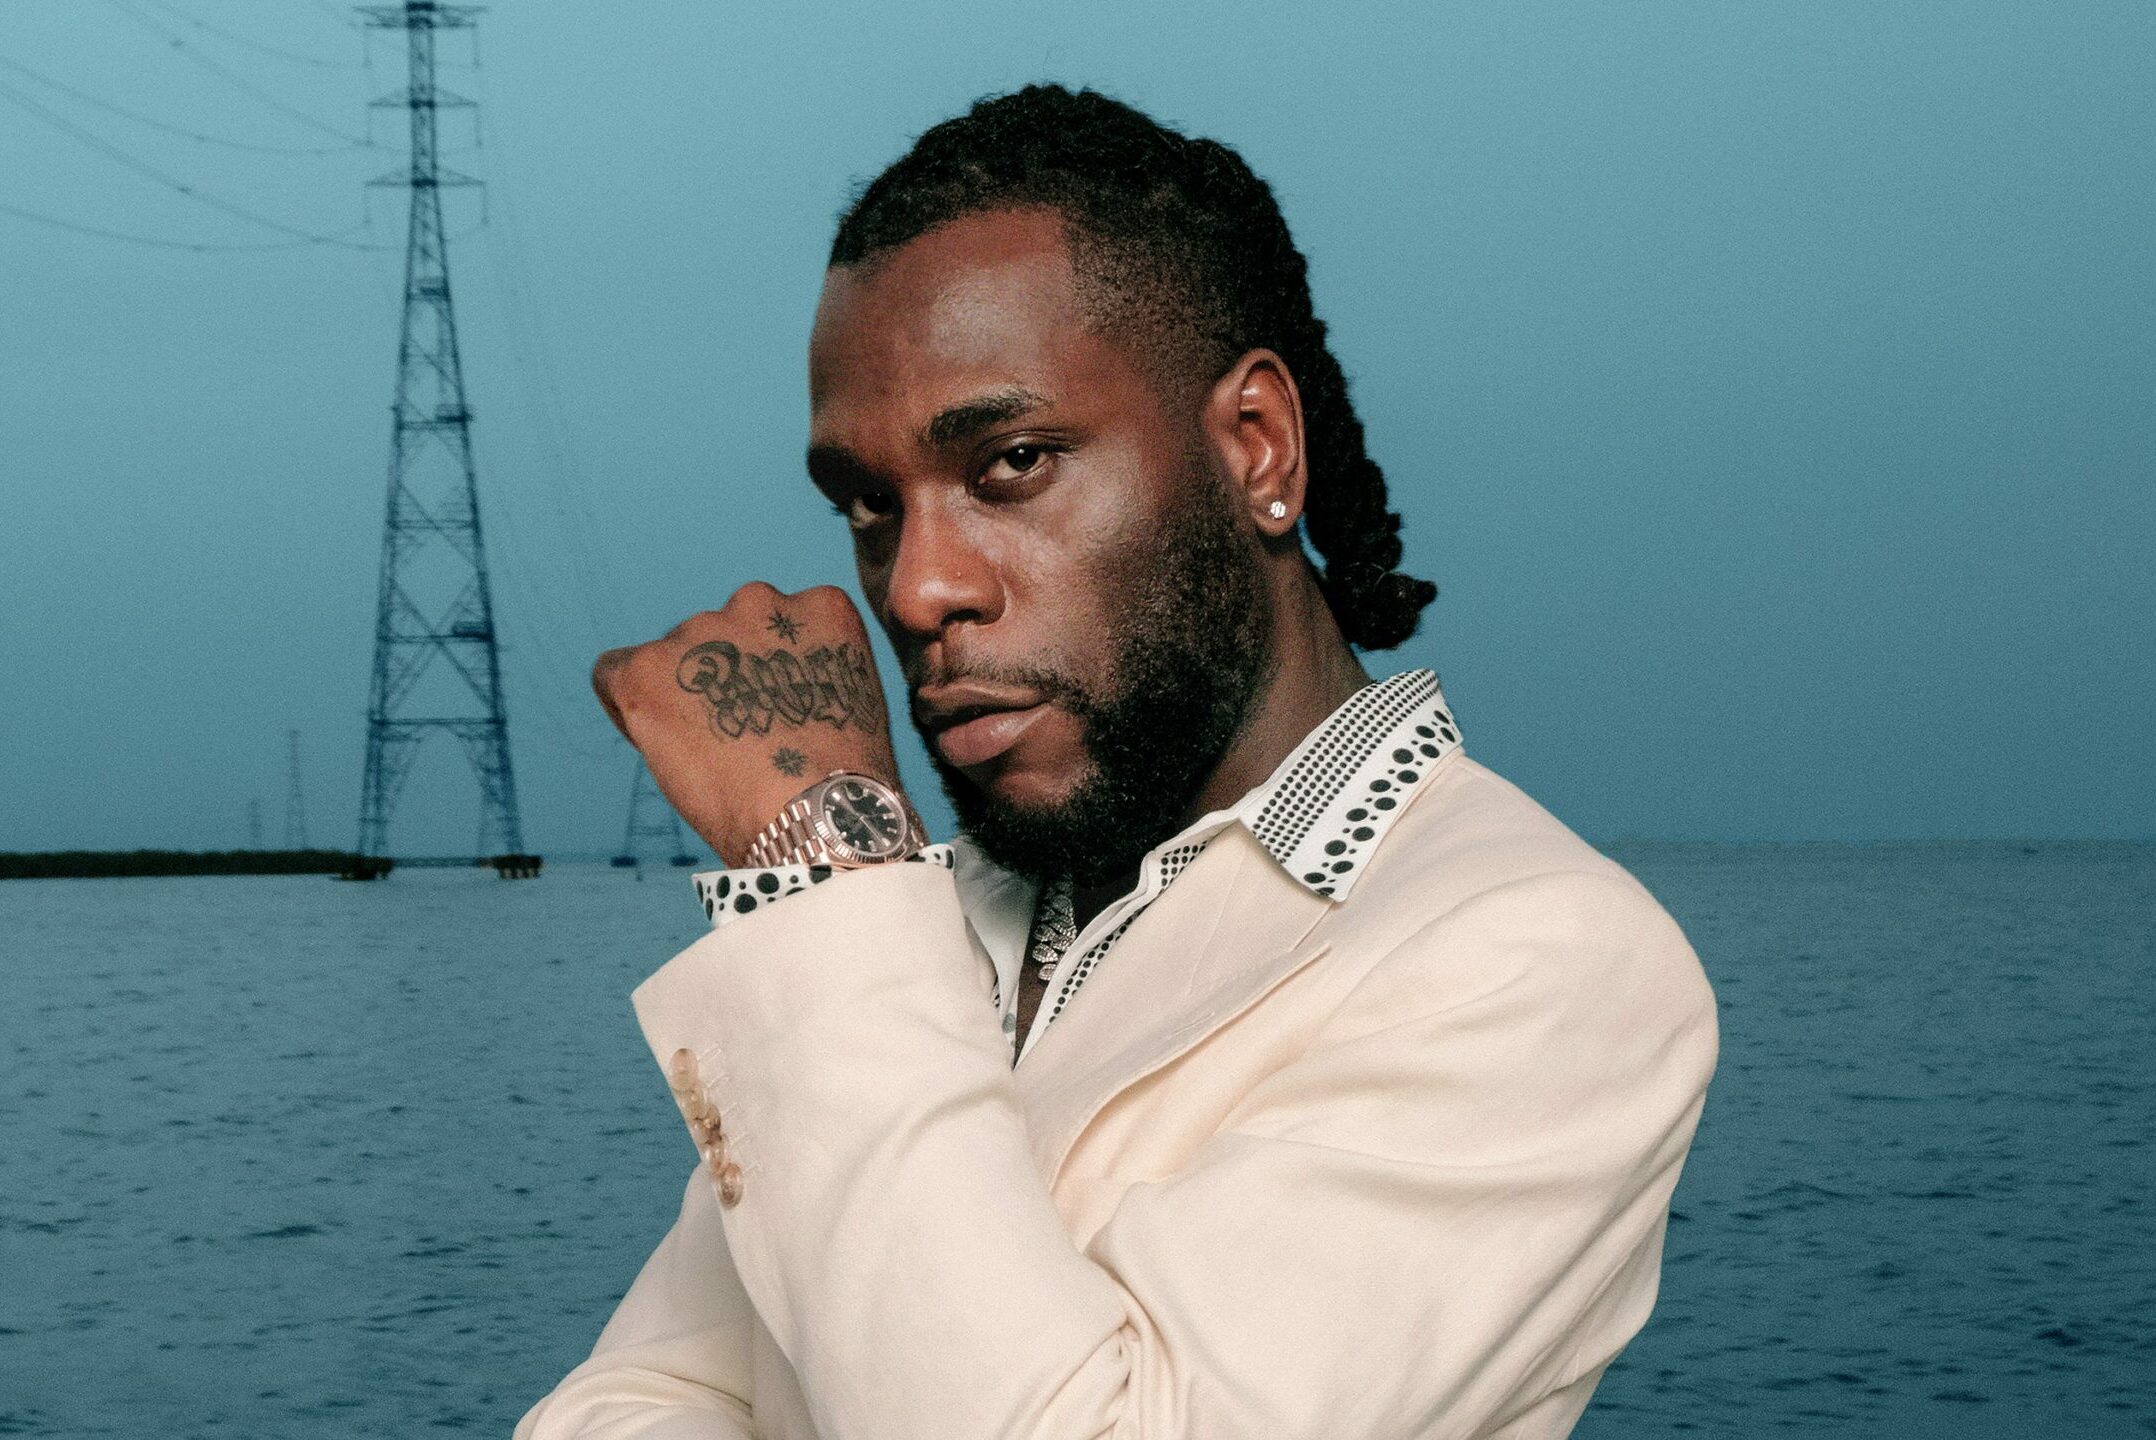 [Watch] Twitter user accuses Burna Boy convoy of damaging his car